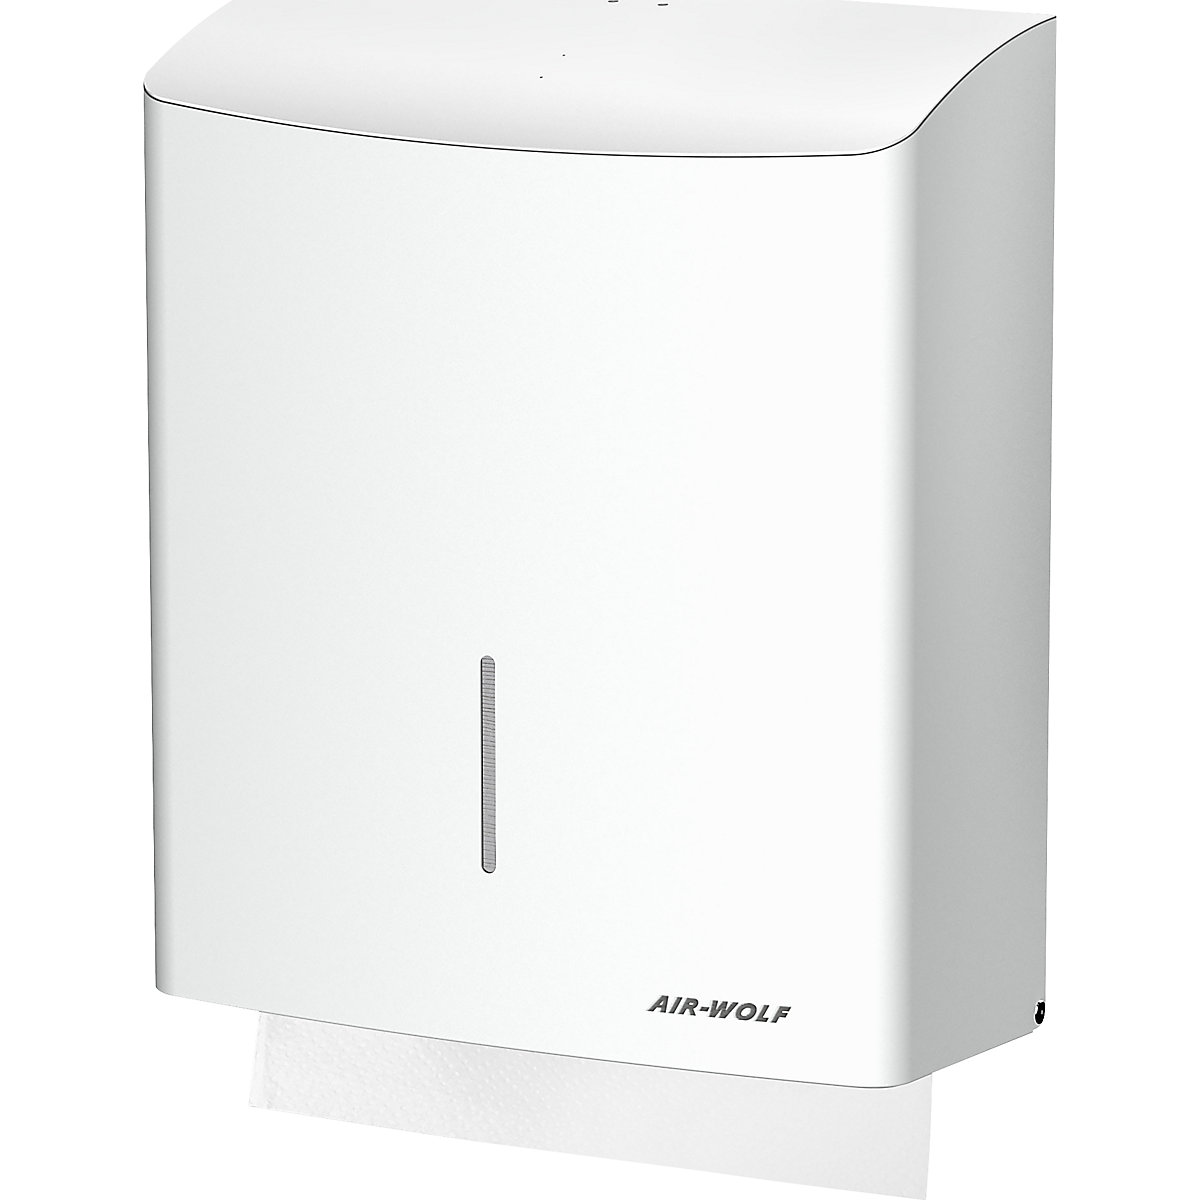 Stainless steel paper towel dispenser – AIR-WOLF, approx. 600 folded paper towels, white stainless steel-6